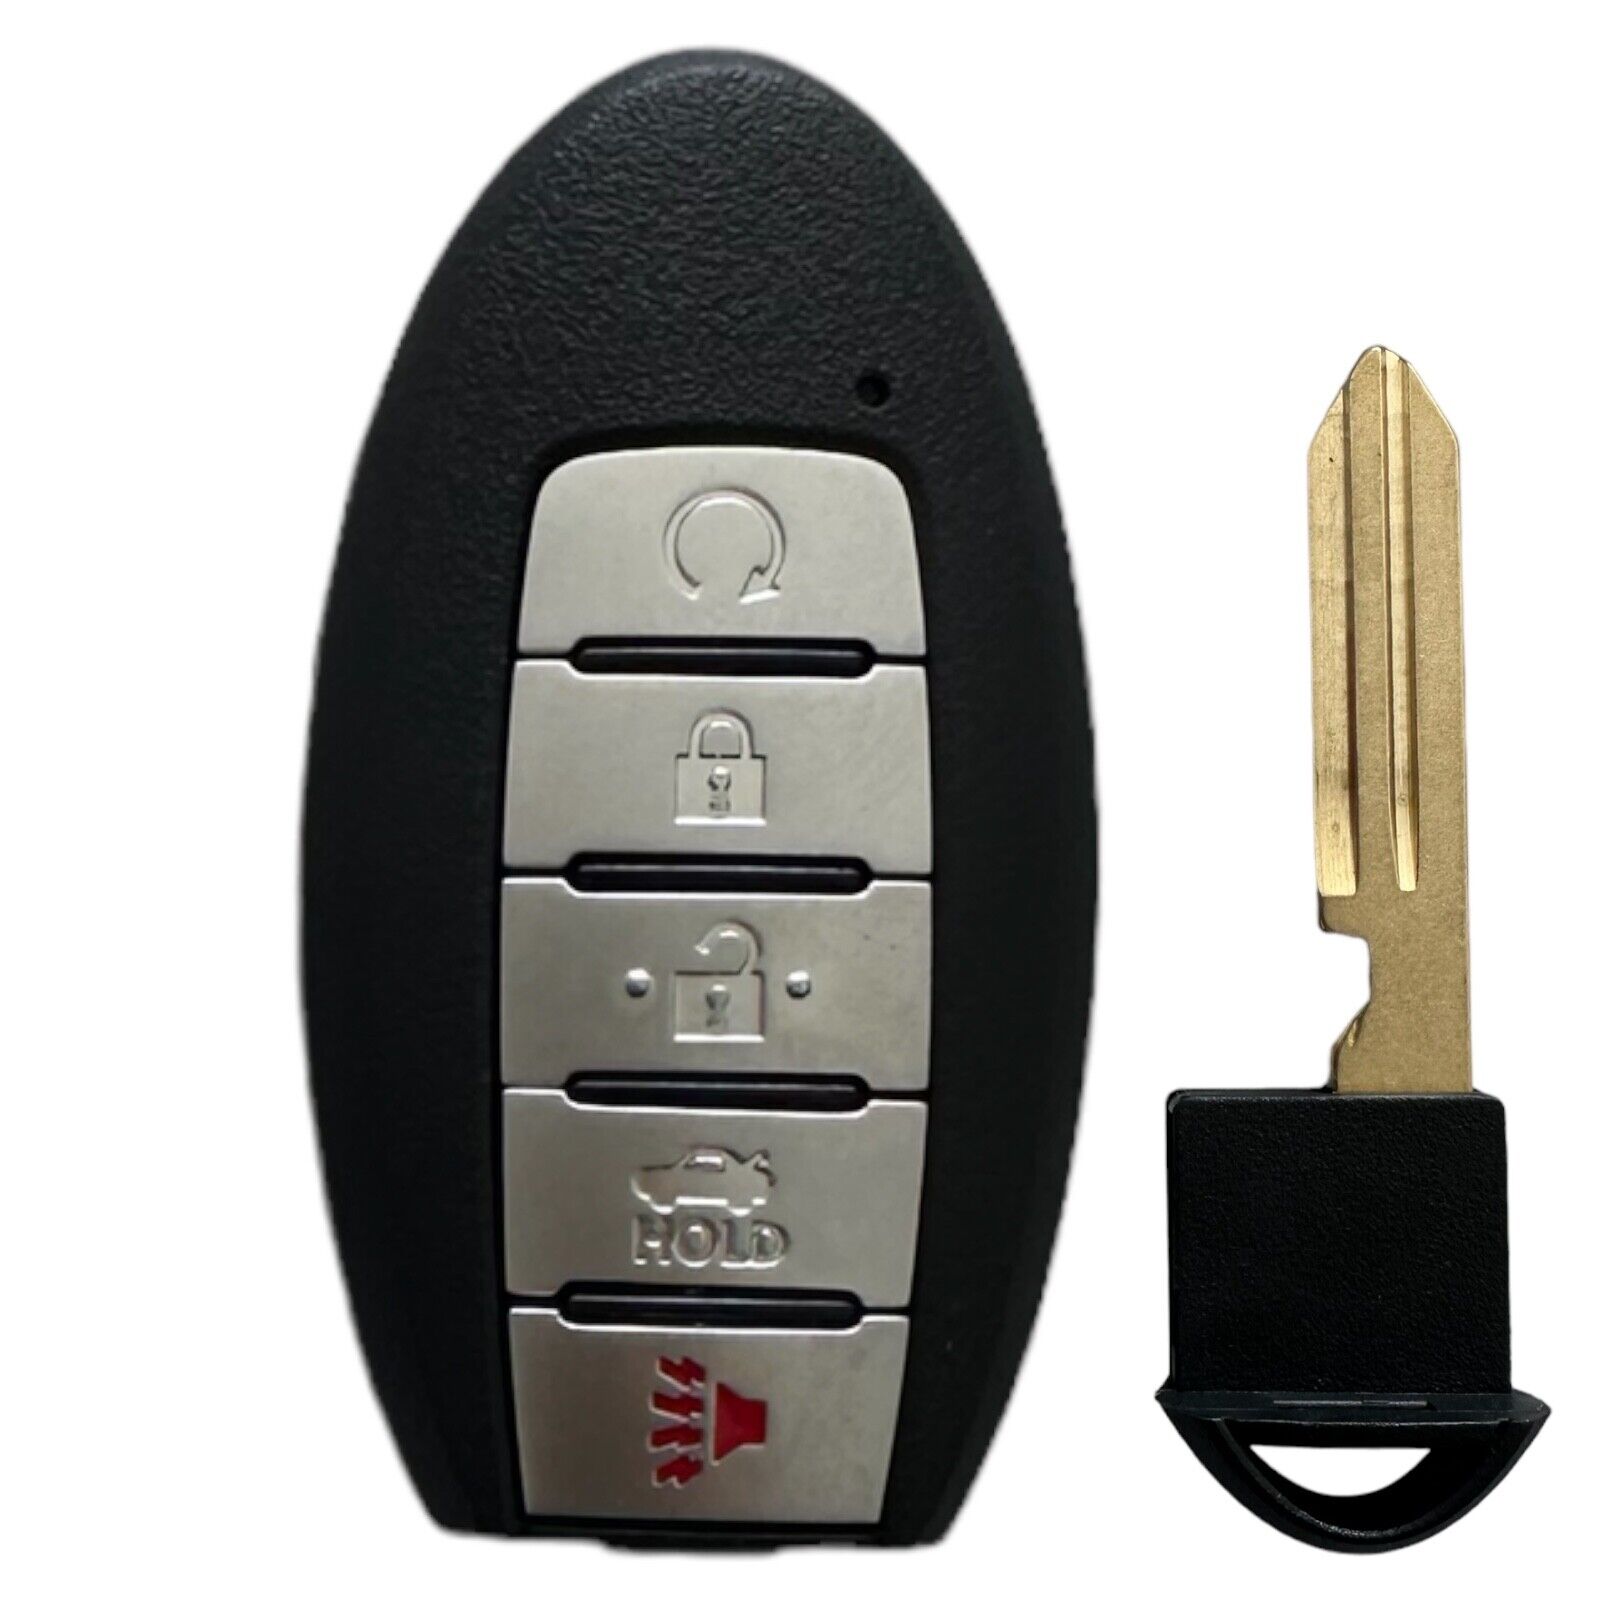 Replacement S180144803 for Nissan Altima 2019 2020 2021 2022 Car Remote Key Fob